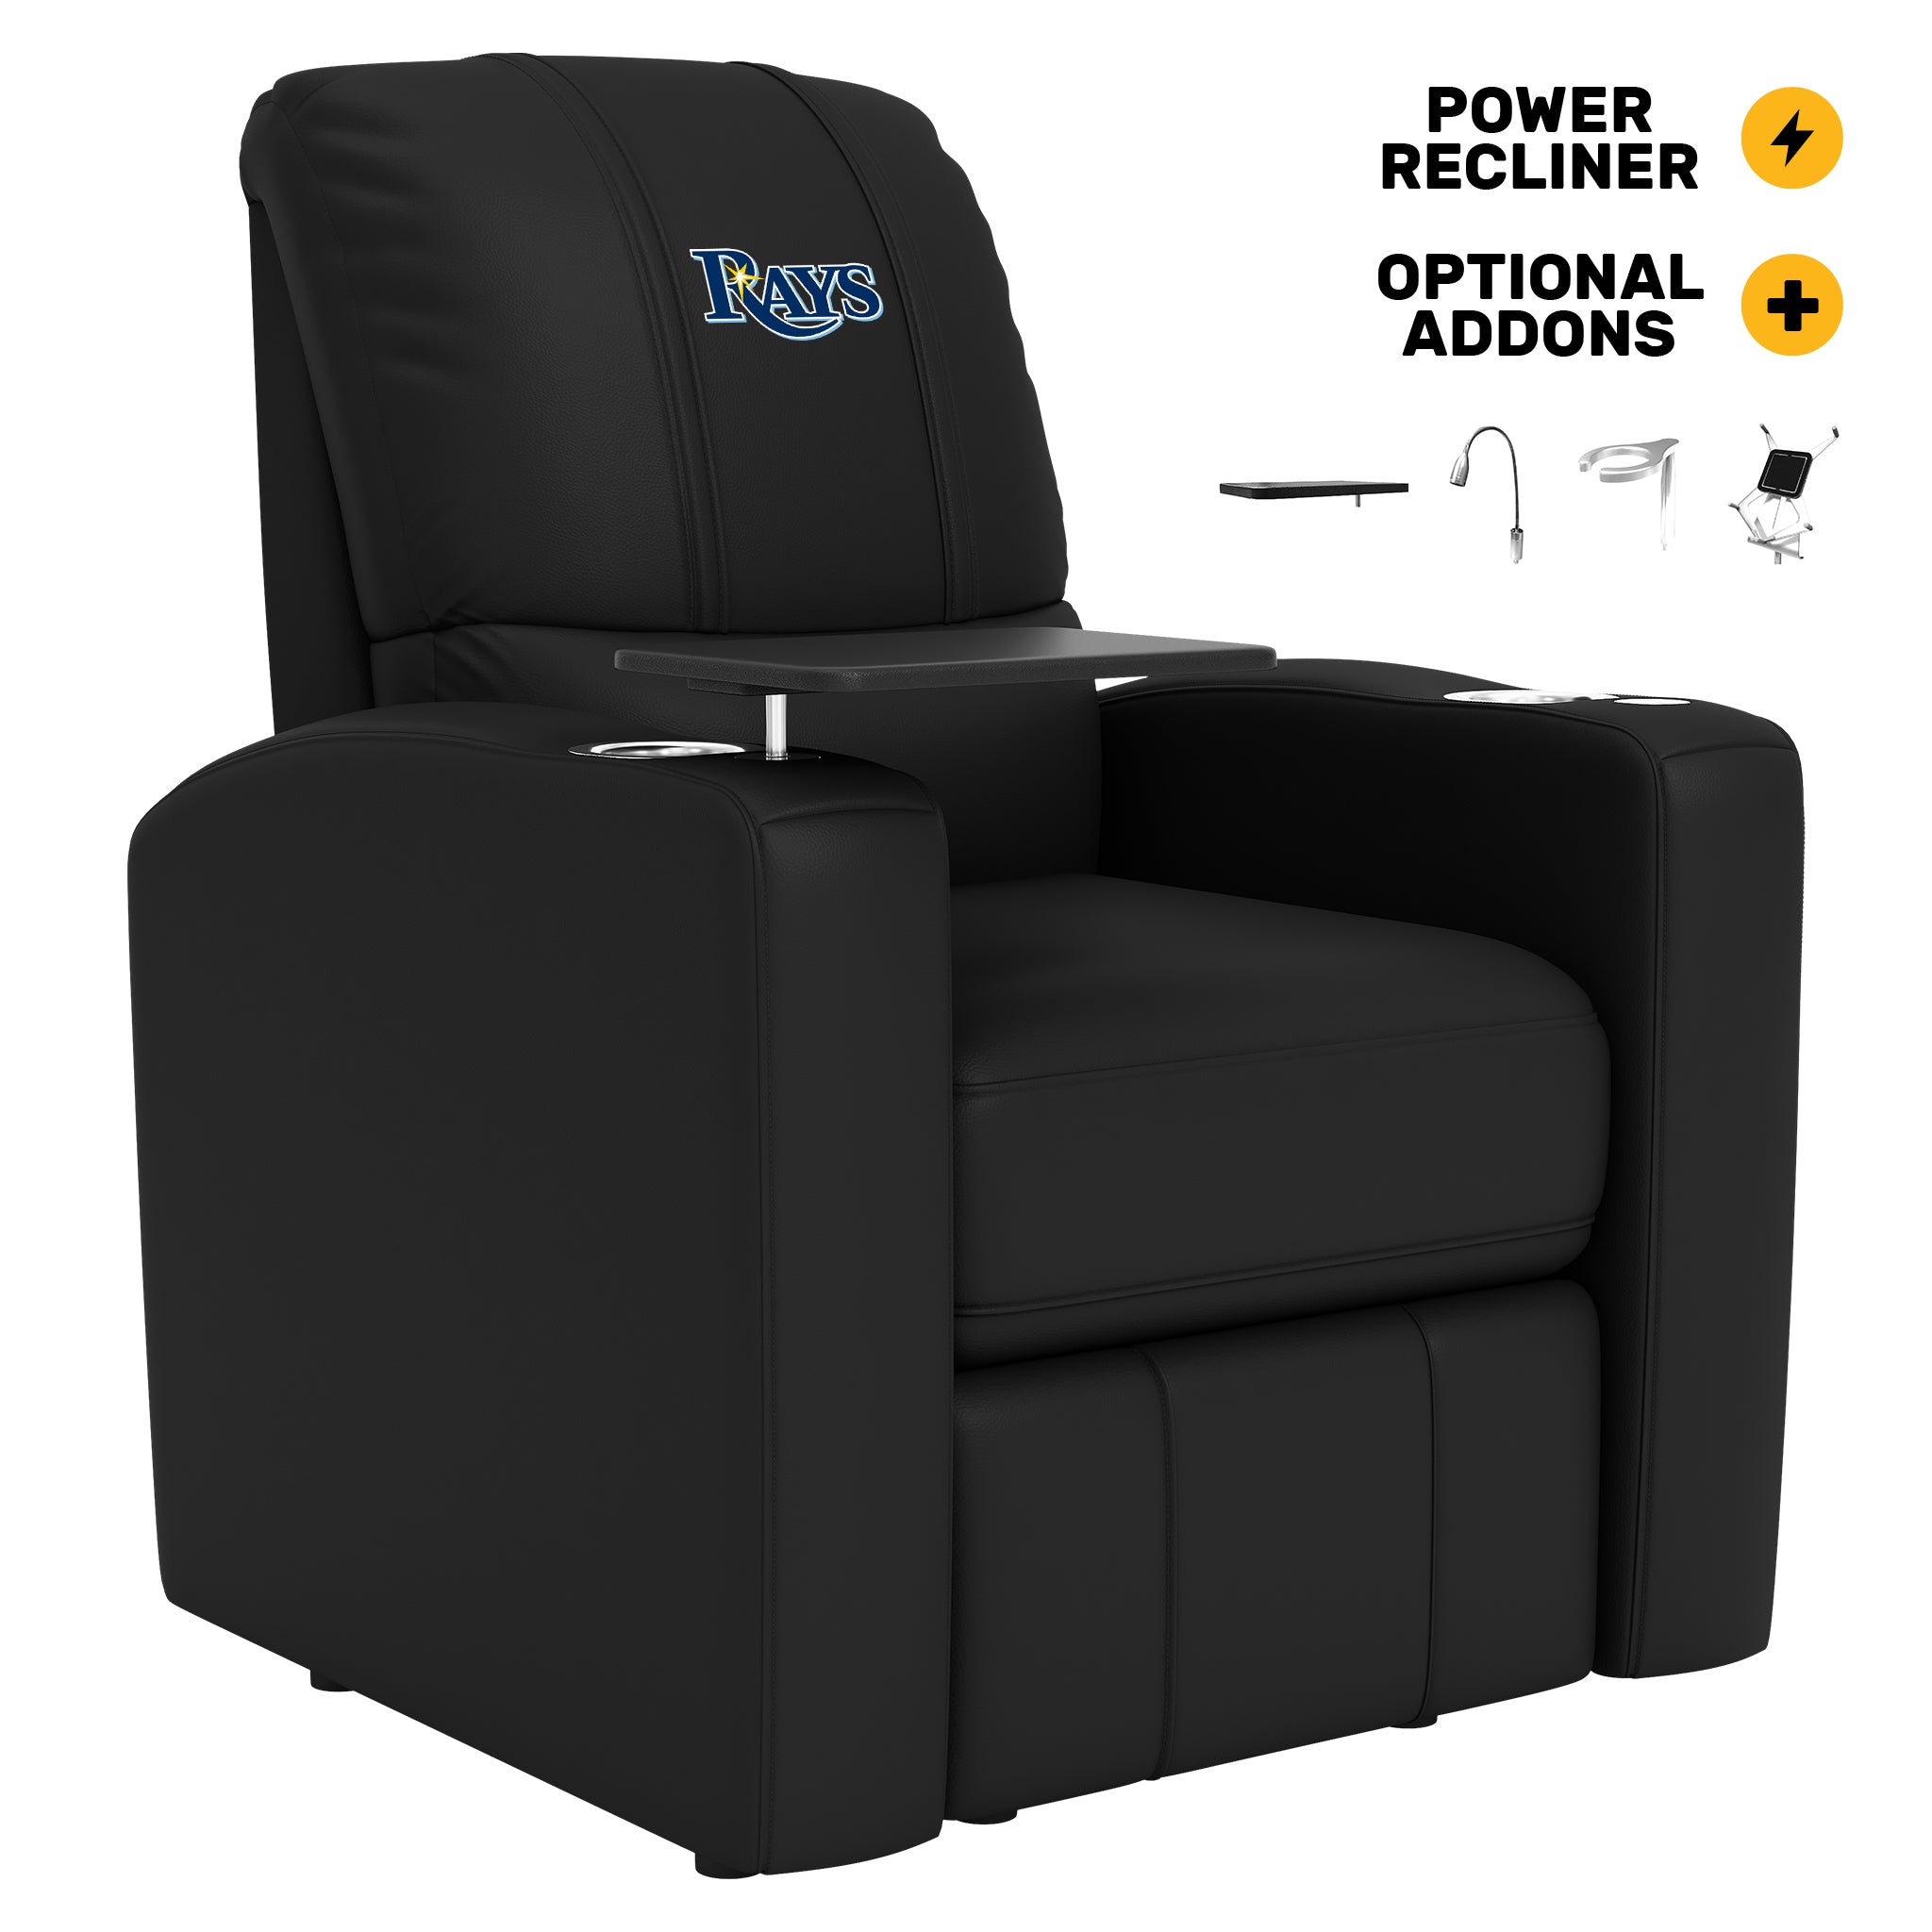 Tampa Bay Rays Logo Panel For Stealth Recliner – Zipchair Gaming